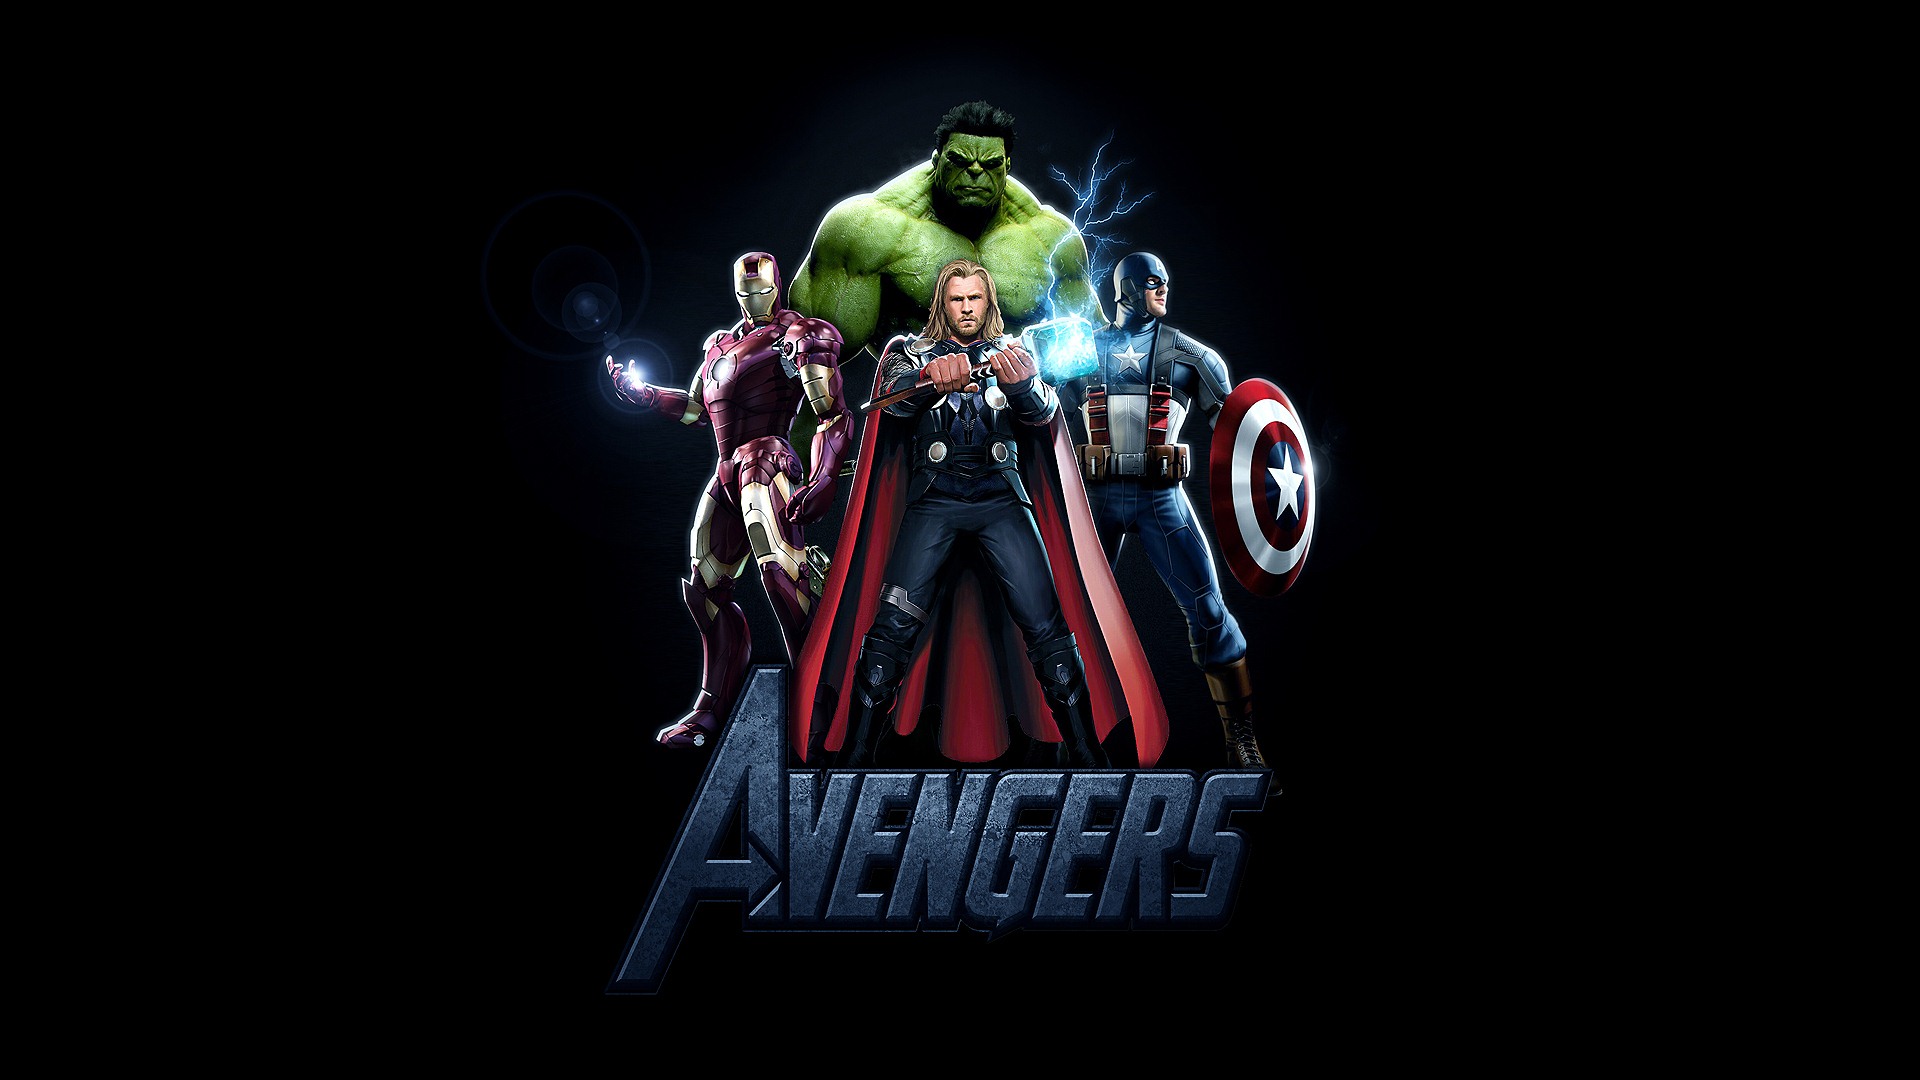 The Avengers 2012 HD wallpapers #17 - 1920x1080